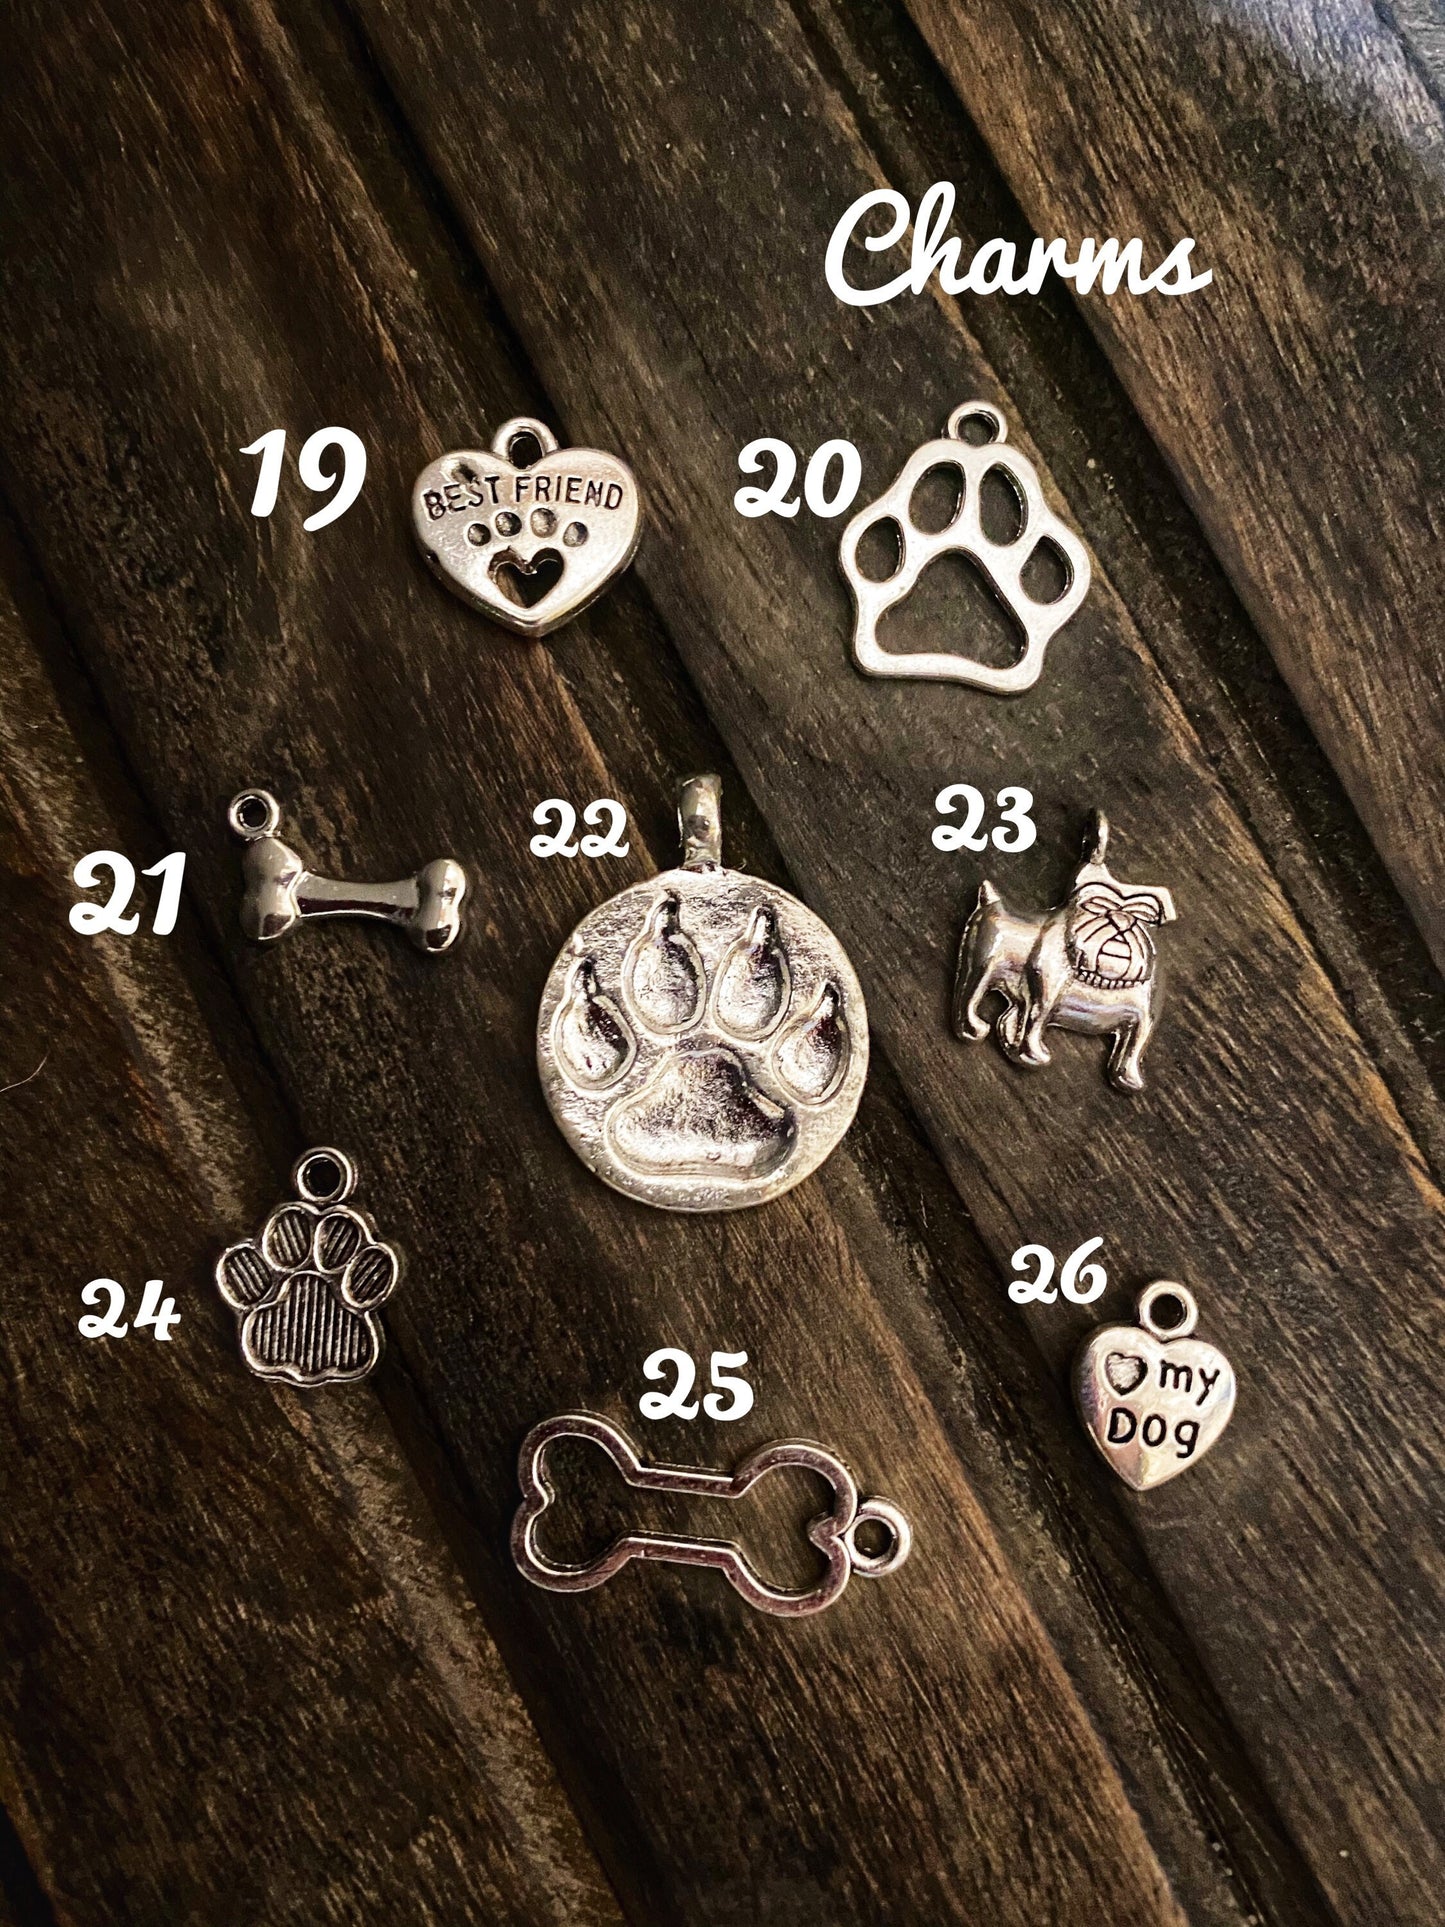 ADD ON only - Additional charms with purchase